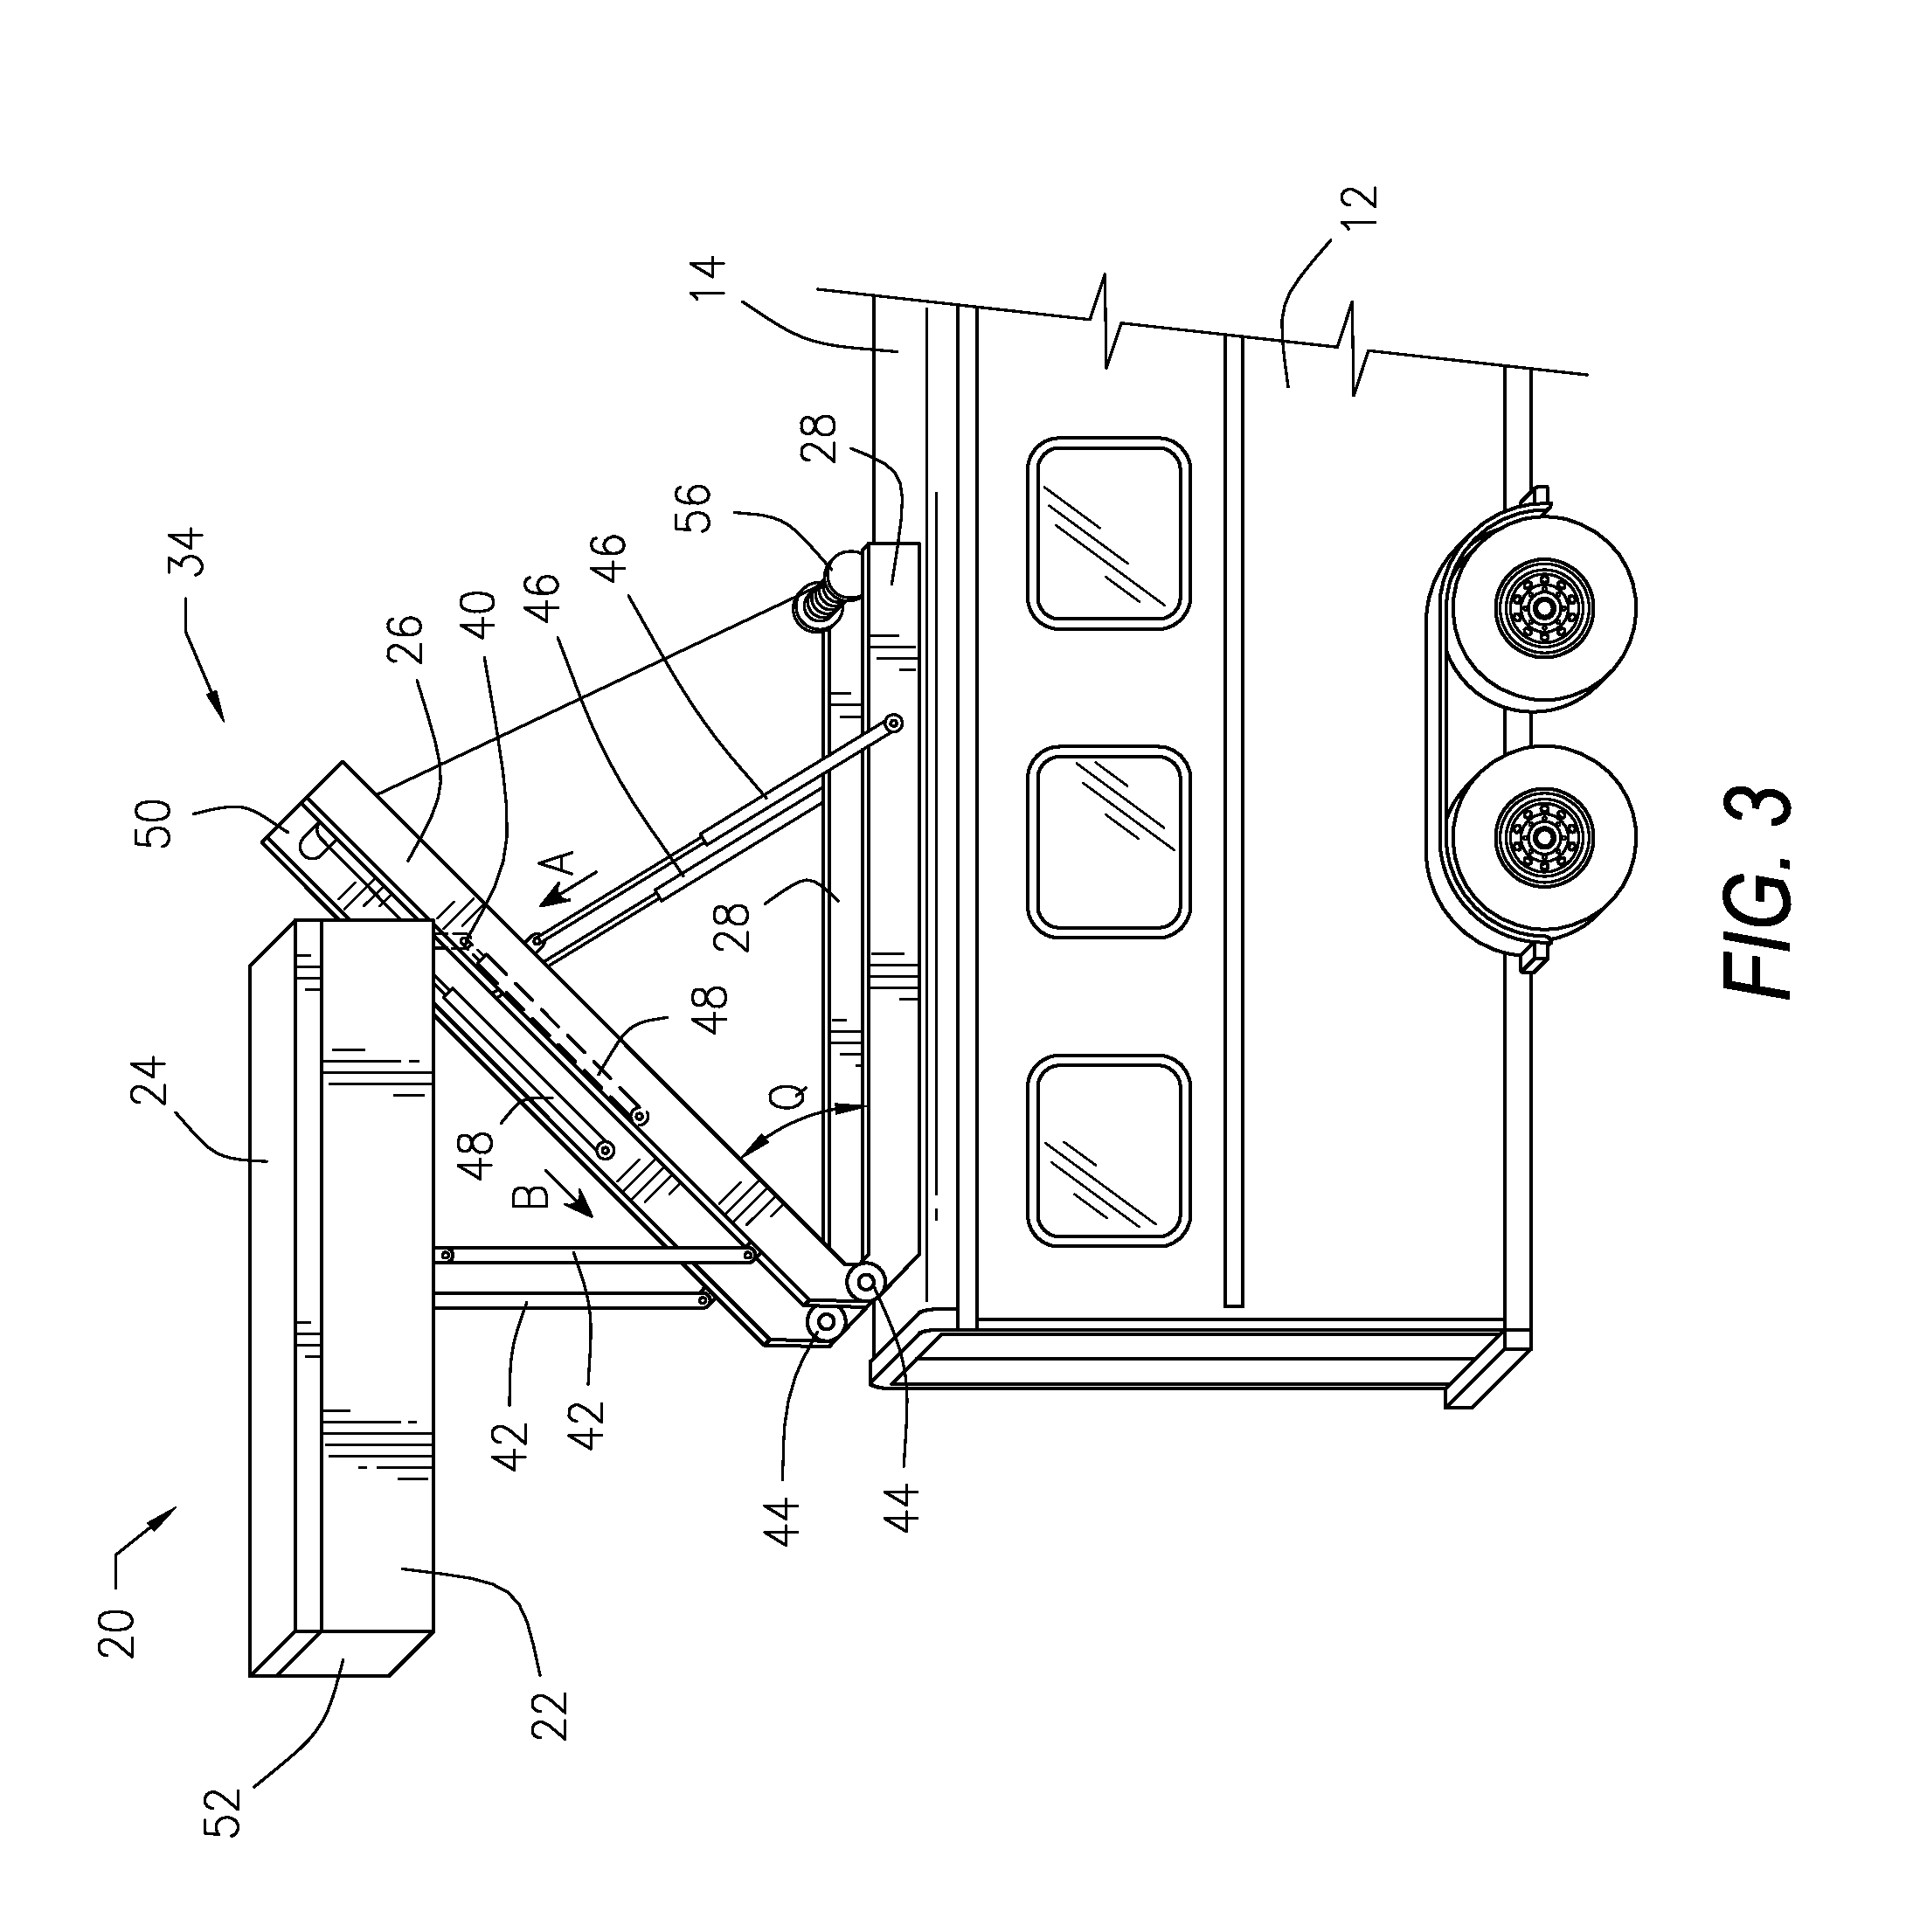 Retractable cargo carrying device